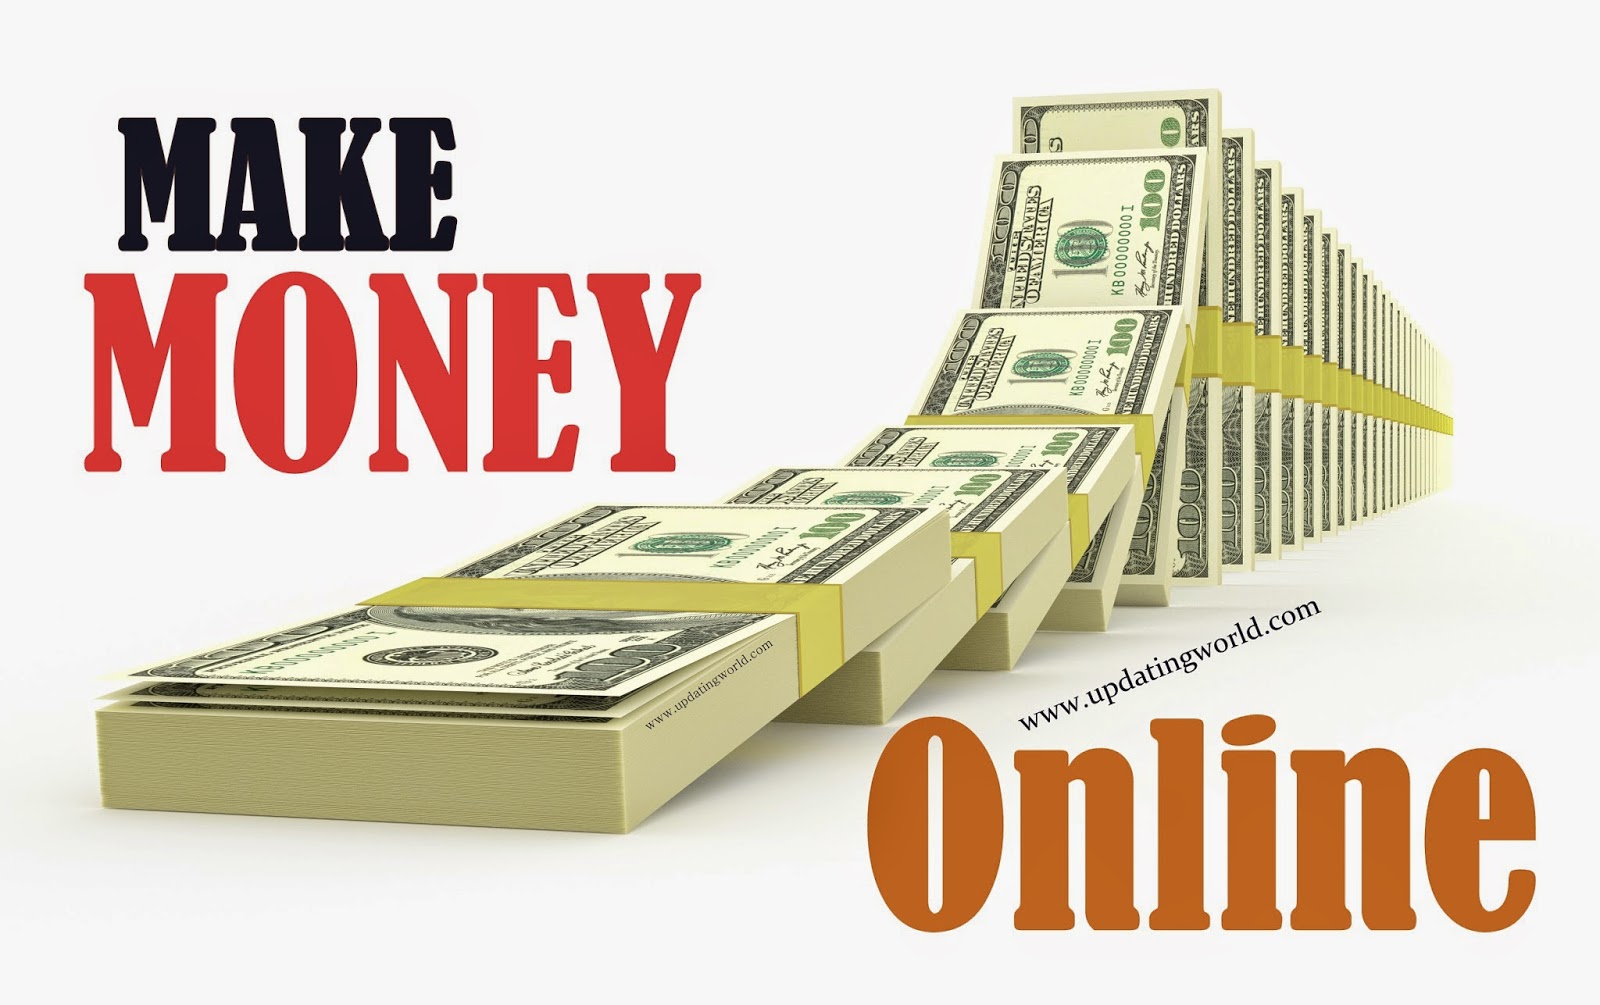 My Personal Product/Service Reviews | Make Money Online Patrol